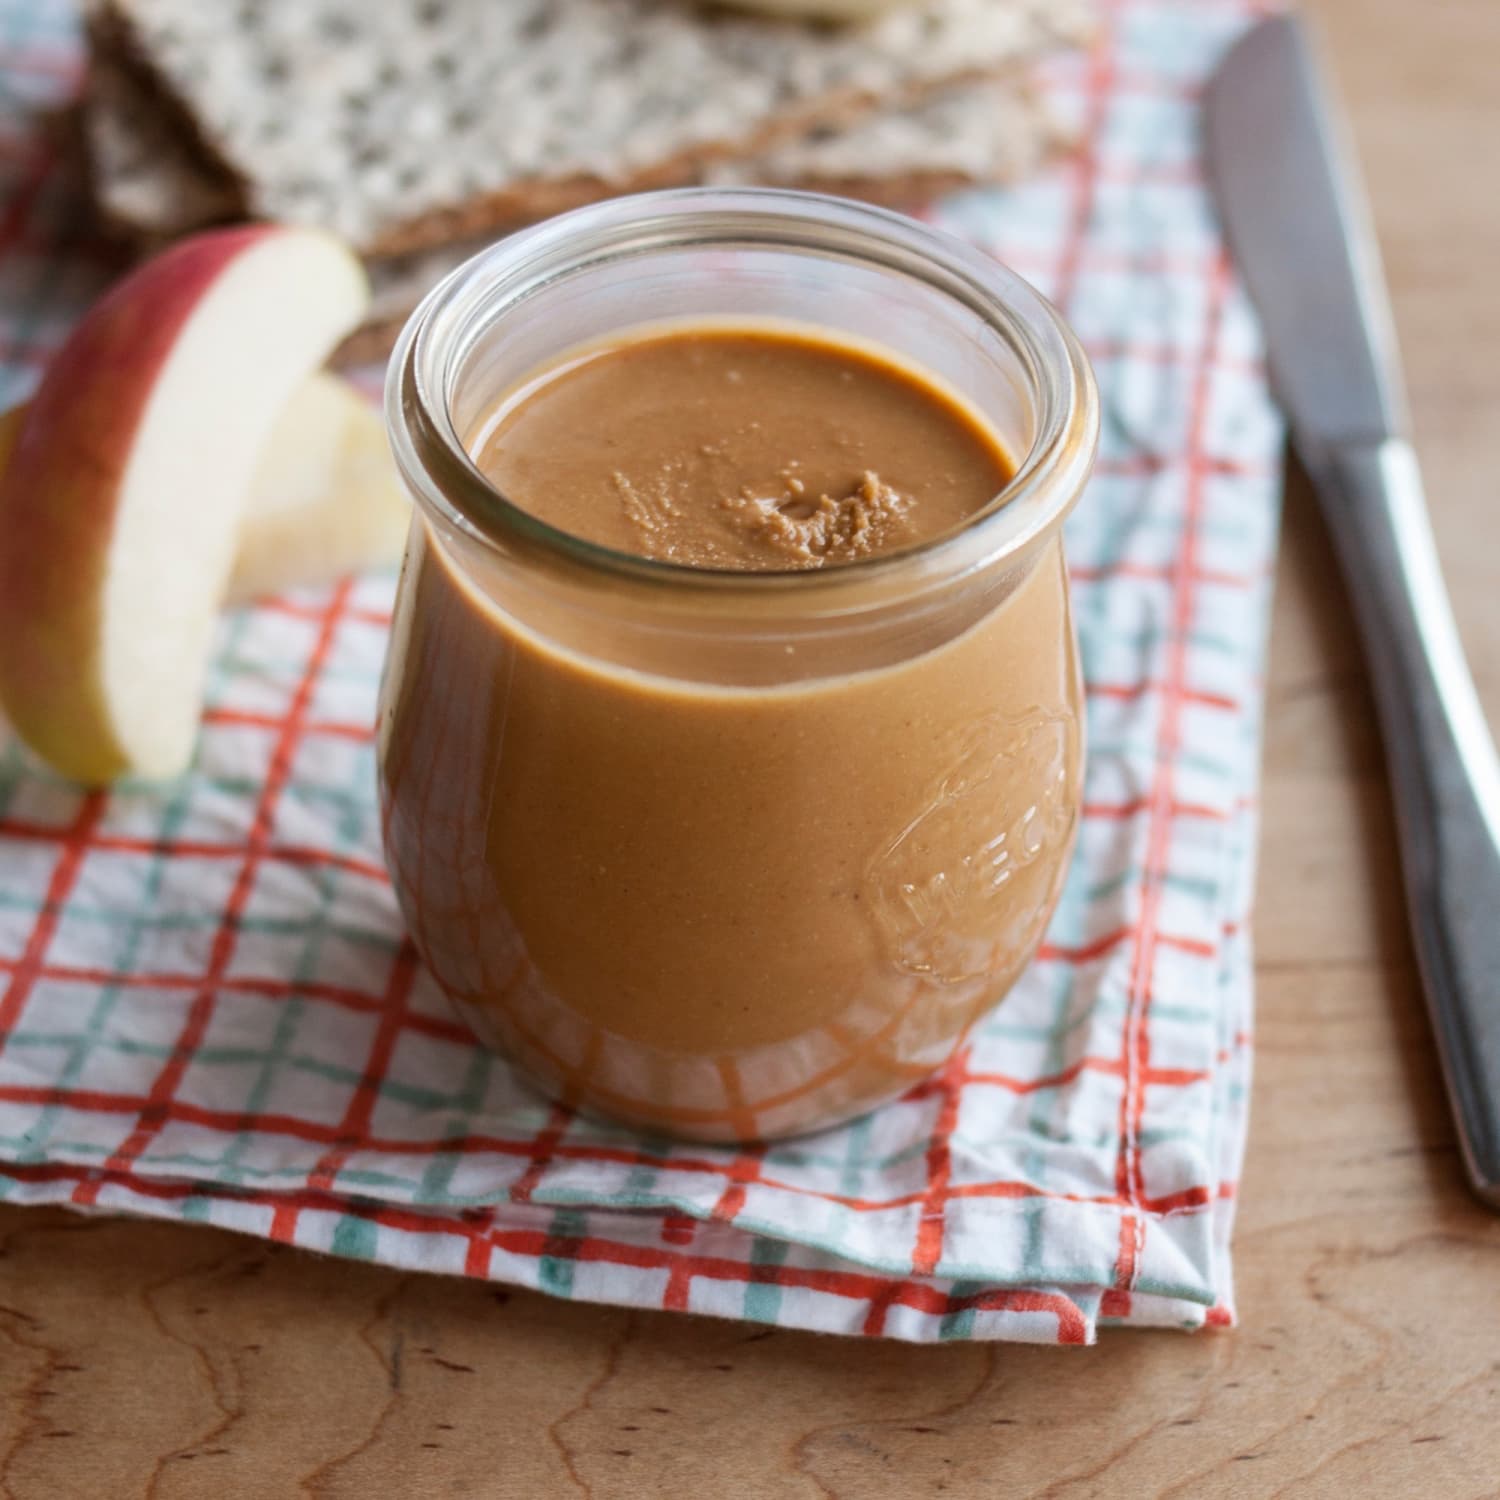 How To Make Homemade Peanut Butter | Kitchn